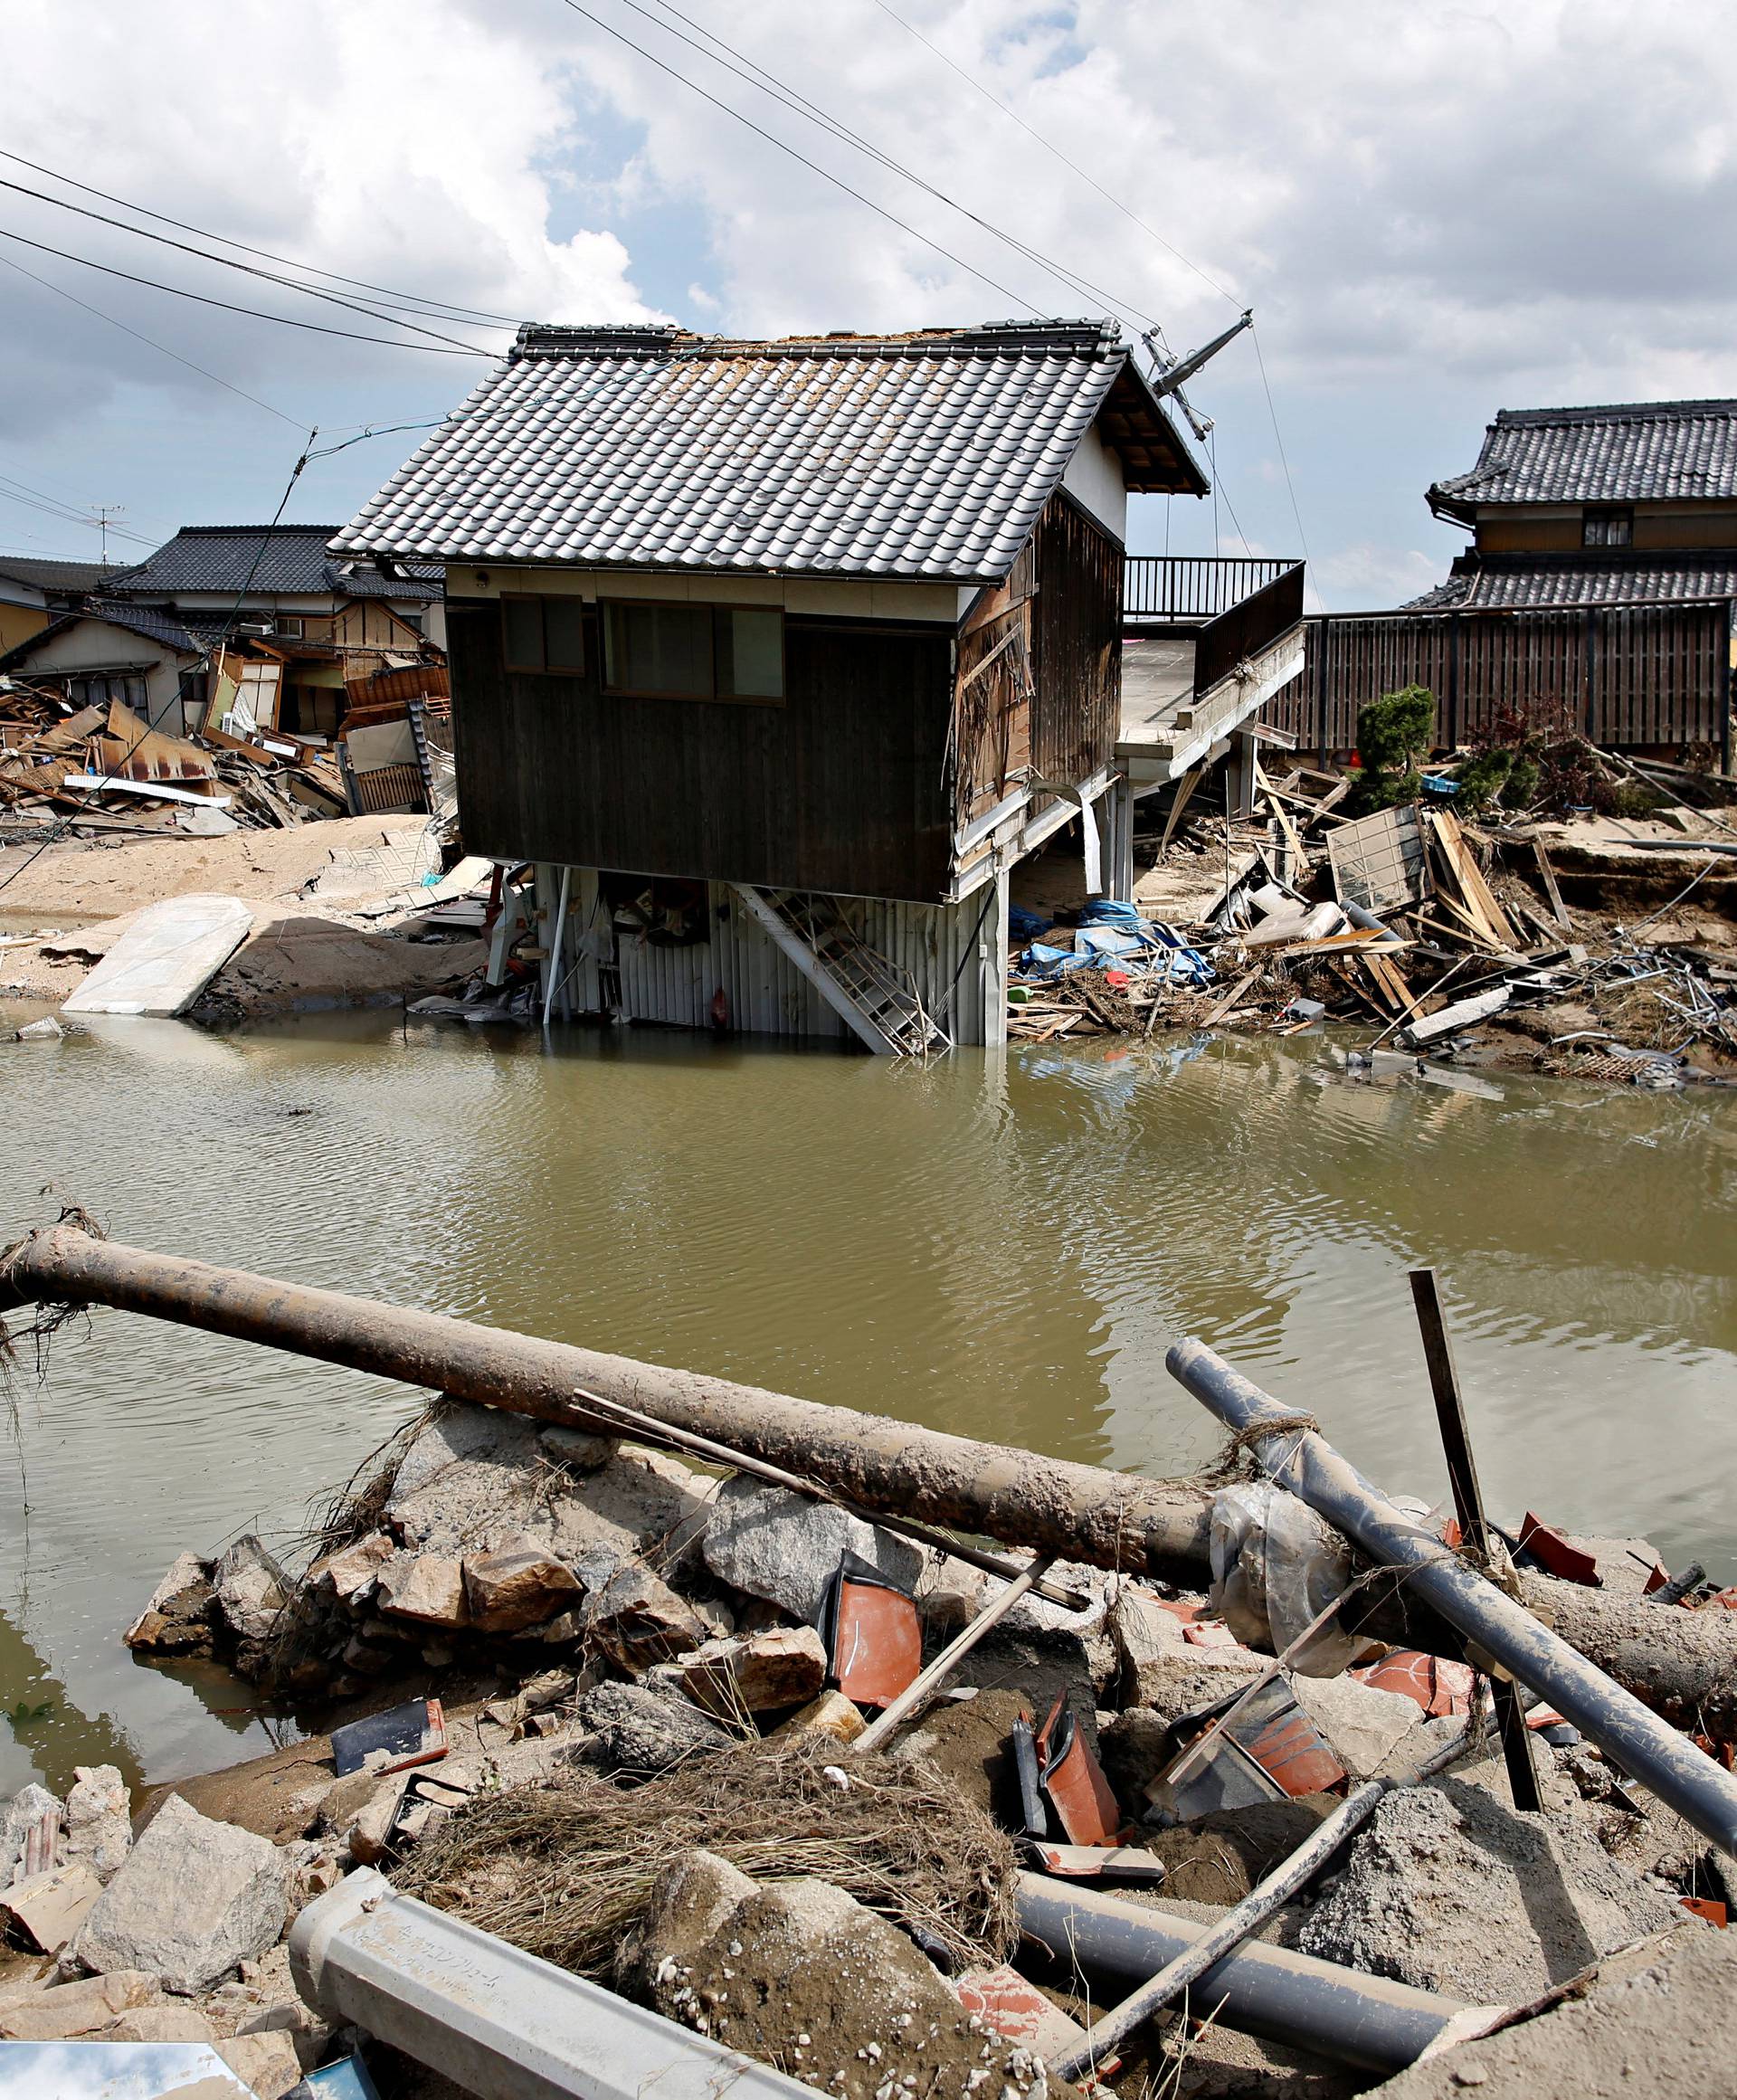 Submerged and destroyed houses are seen in a flooded area in Mabi town in Kurashiki